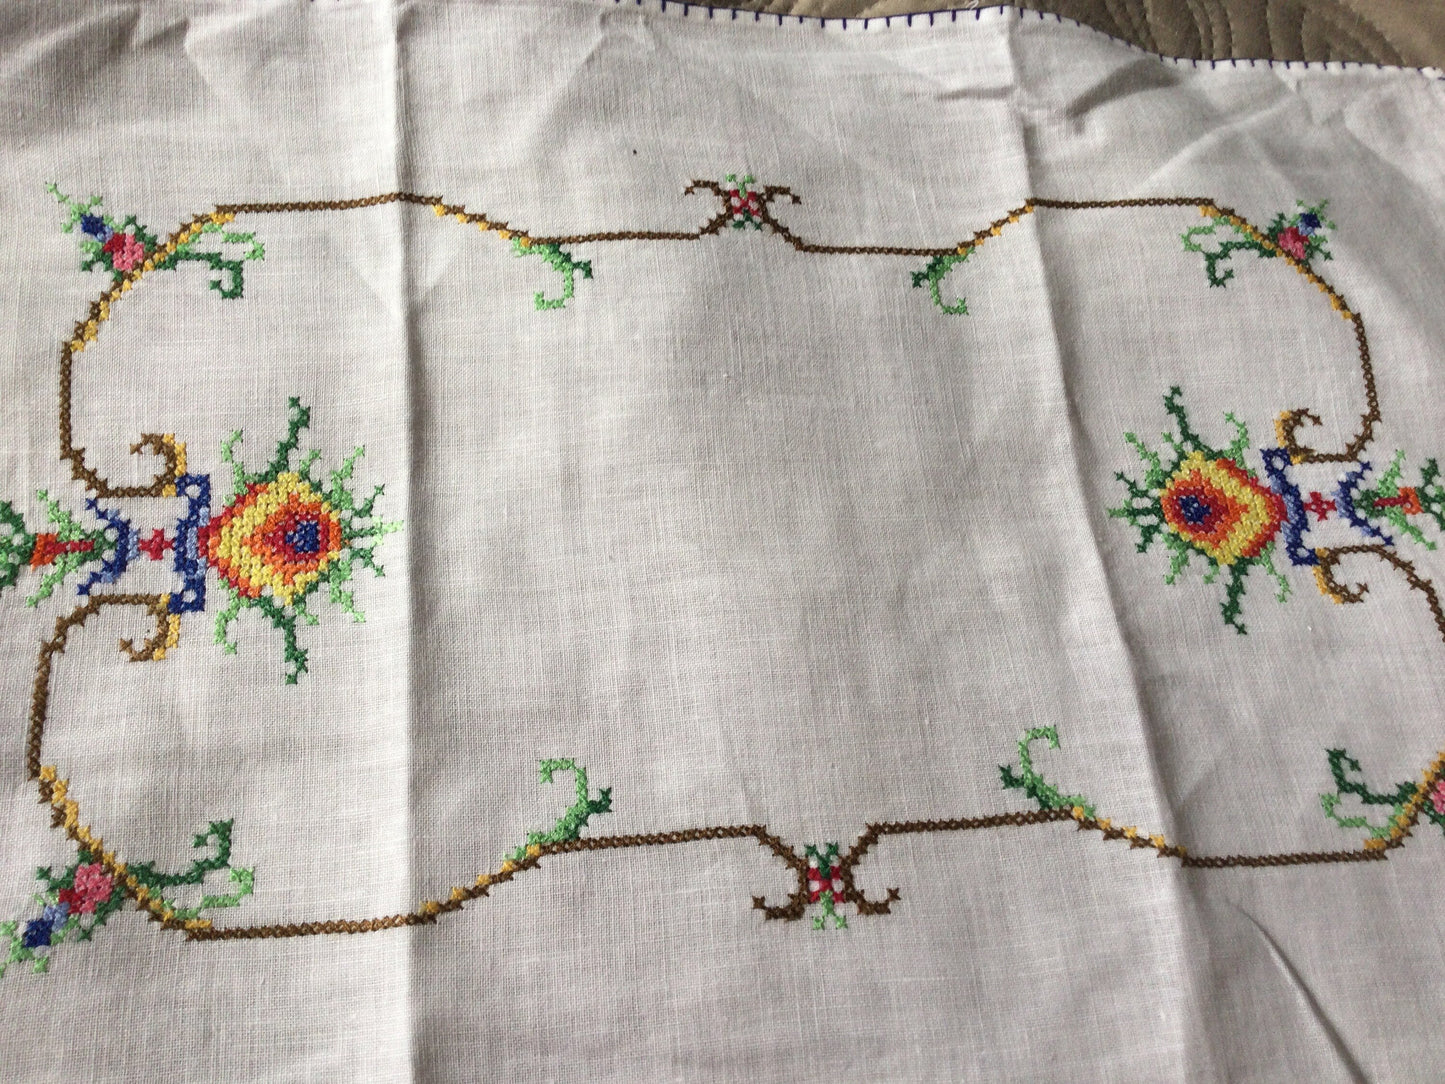 17.5 x 11 inch Vintage embroidered pretty floral white linen tray cloth